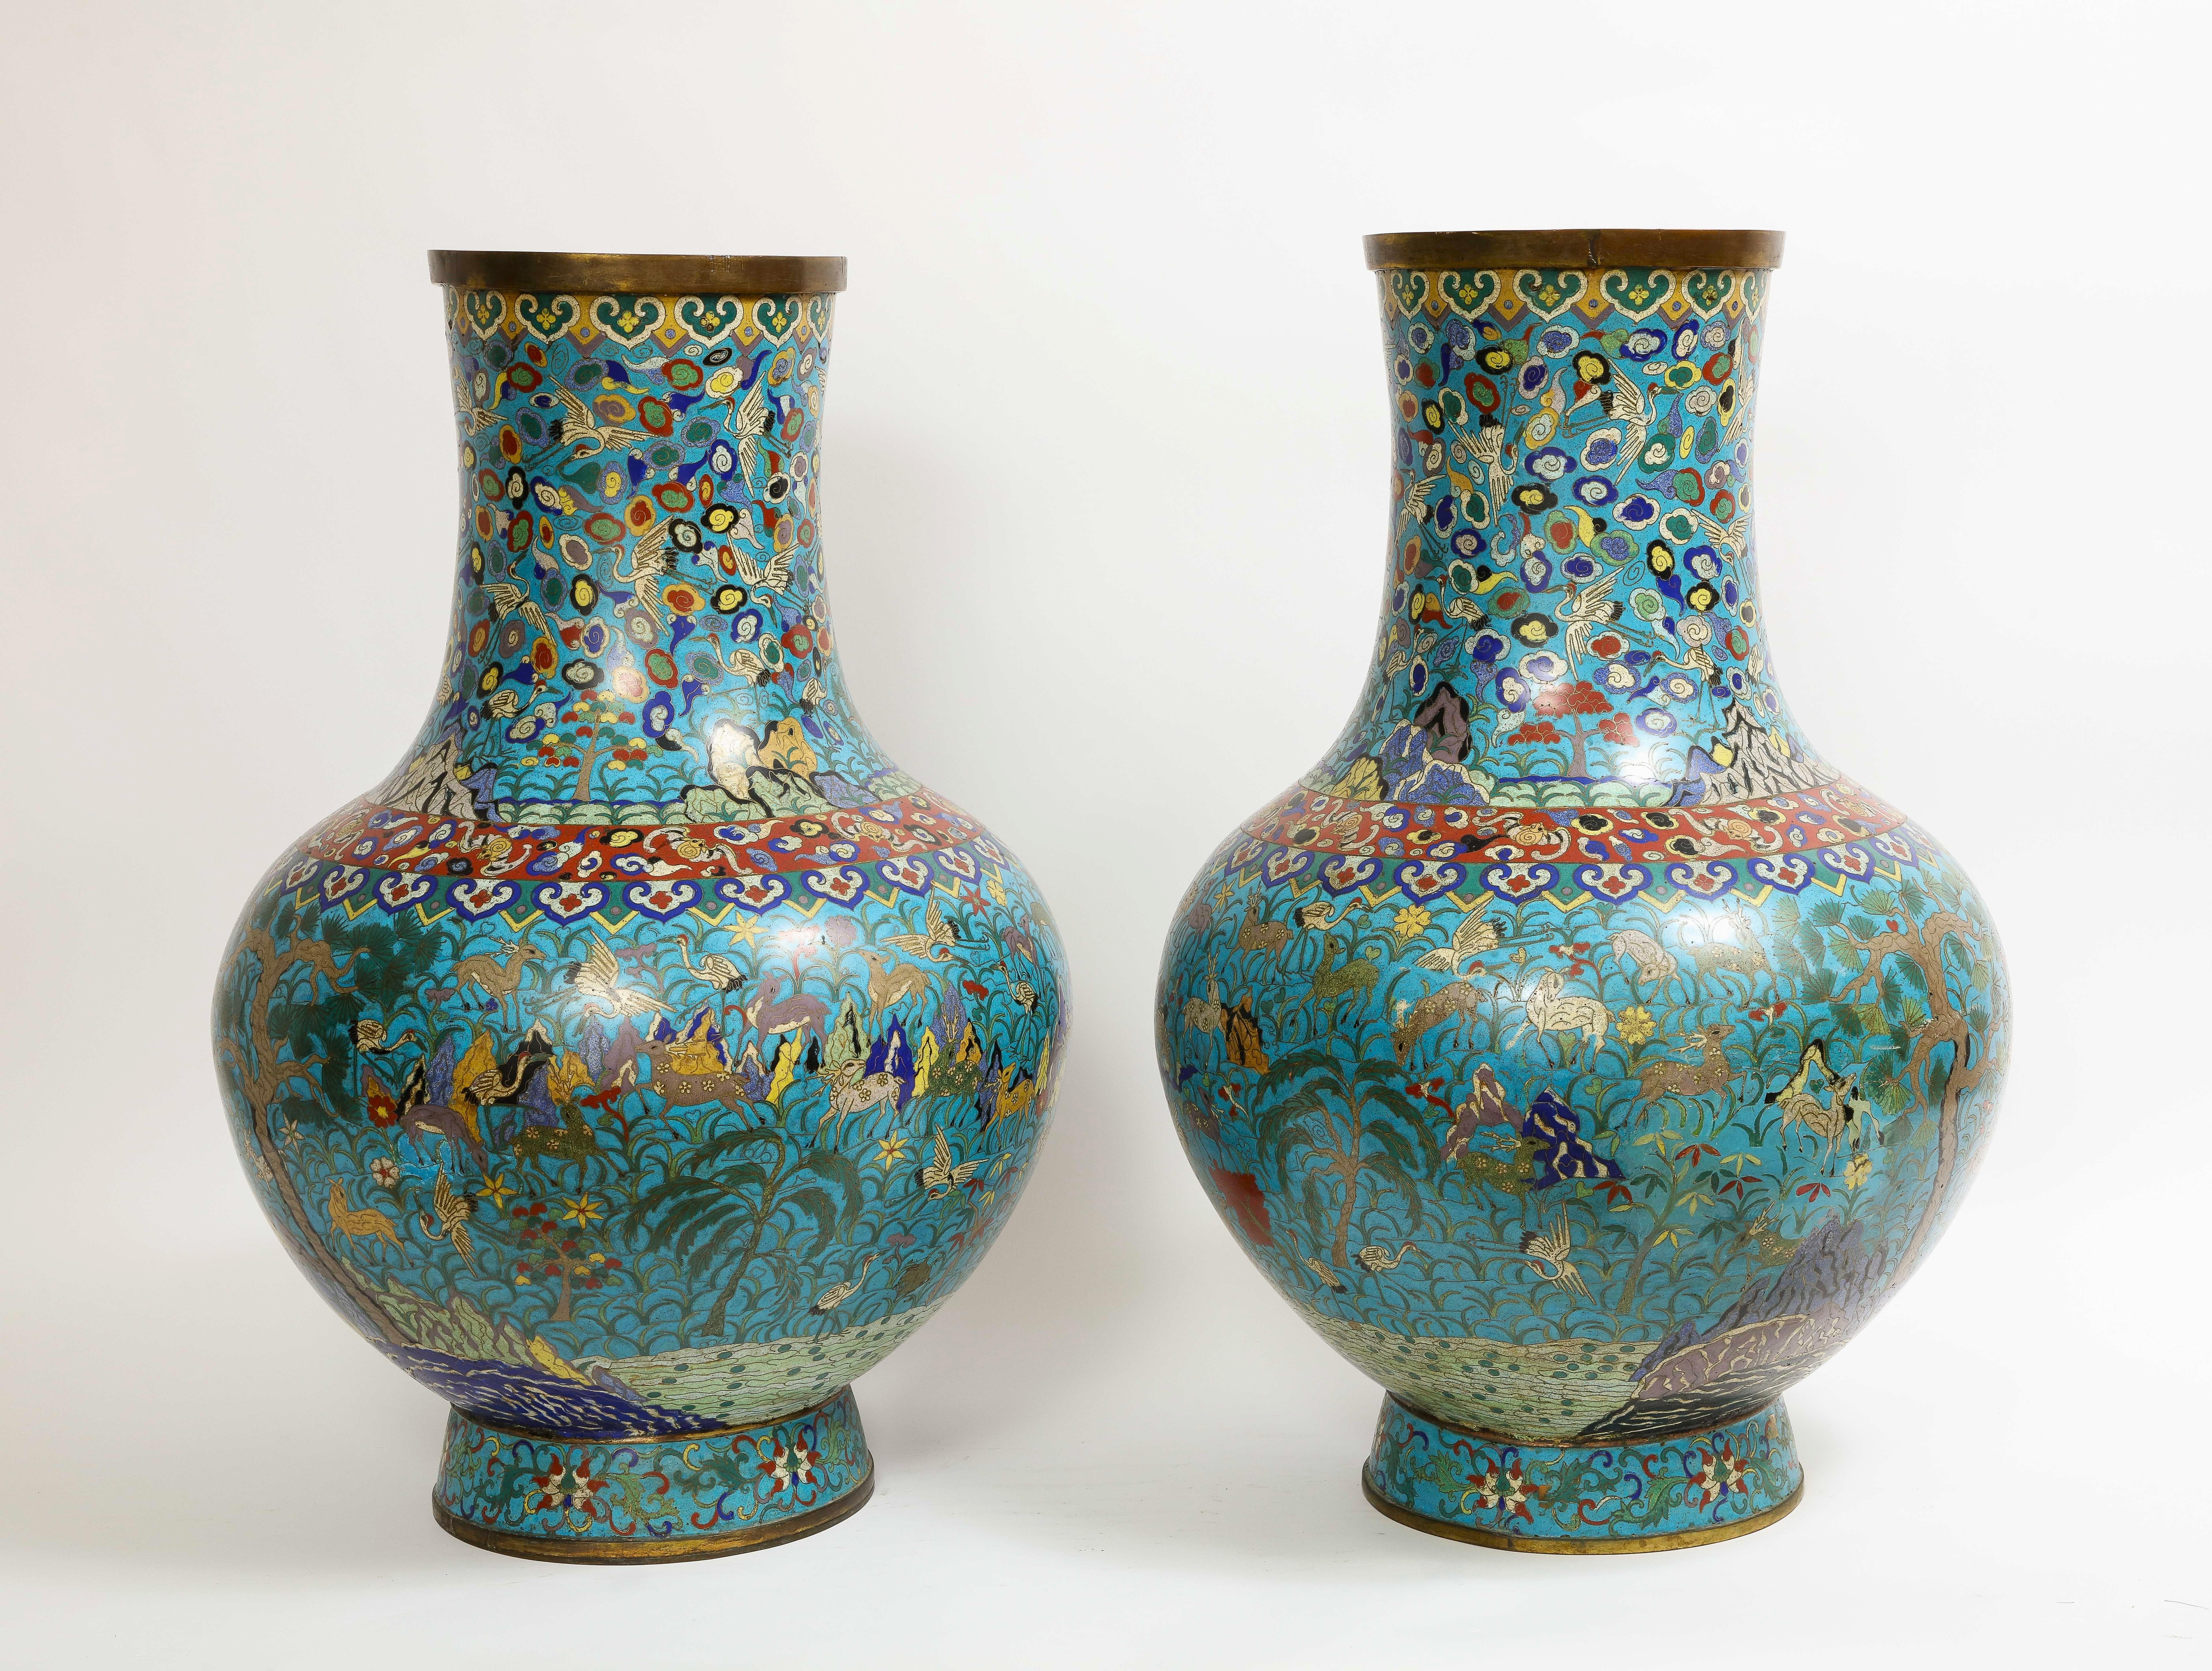 A massive and impressive Pair of 19th C. Chinese Cloisonne Enamel Vases with '100' Deer Decoration. Decorated with a multitude of deer and birds amongst a meadow with flowering branches growing from rocks and mountains on a turquoise ground. The